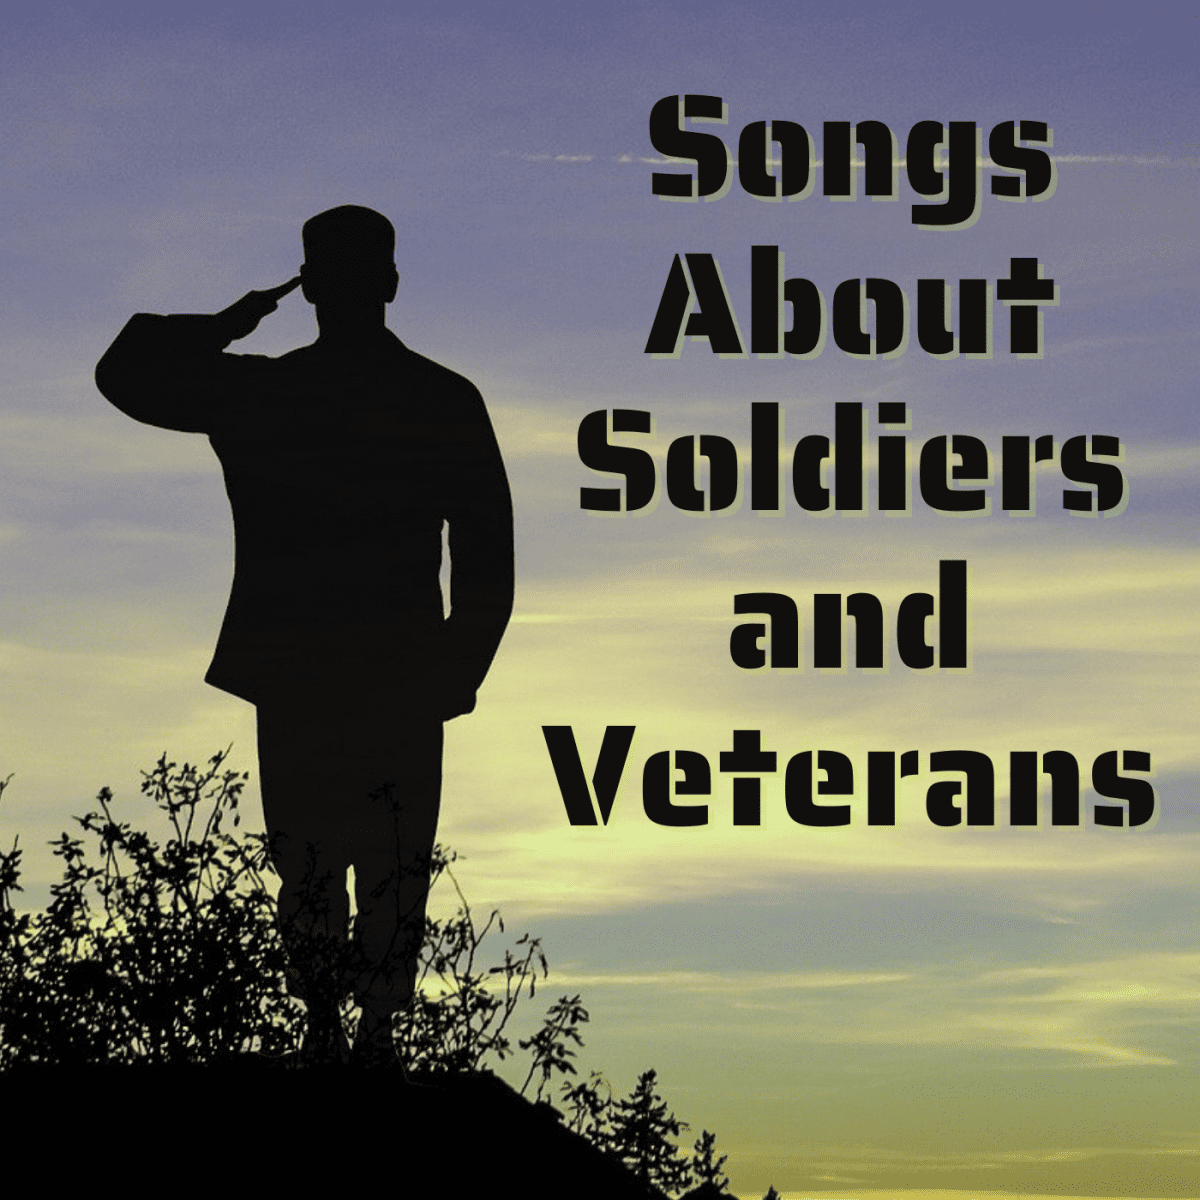 94 Songs About Soldiers and Veterans -